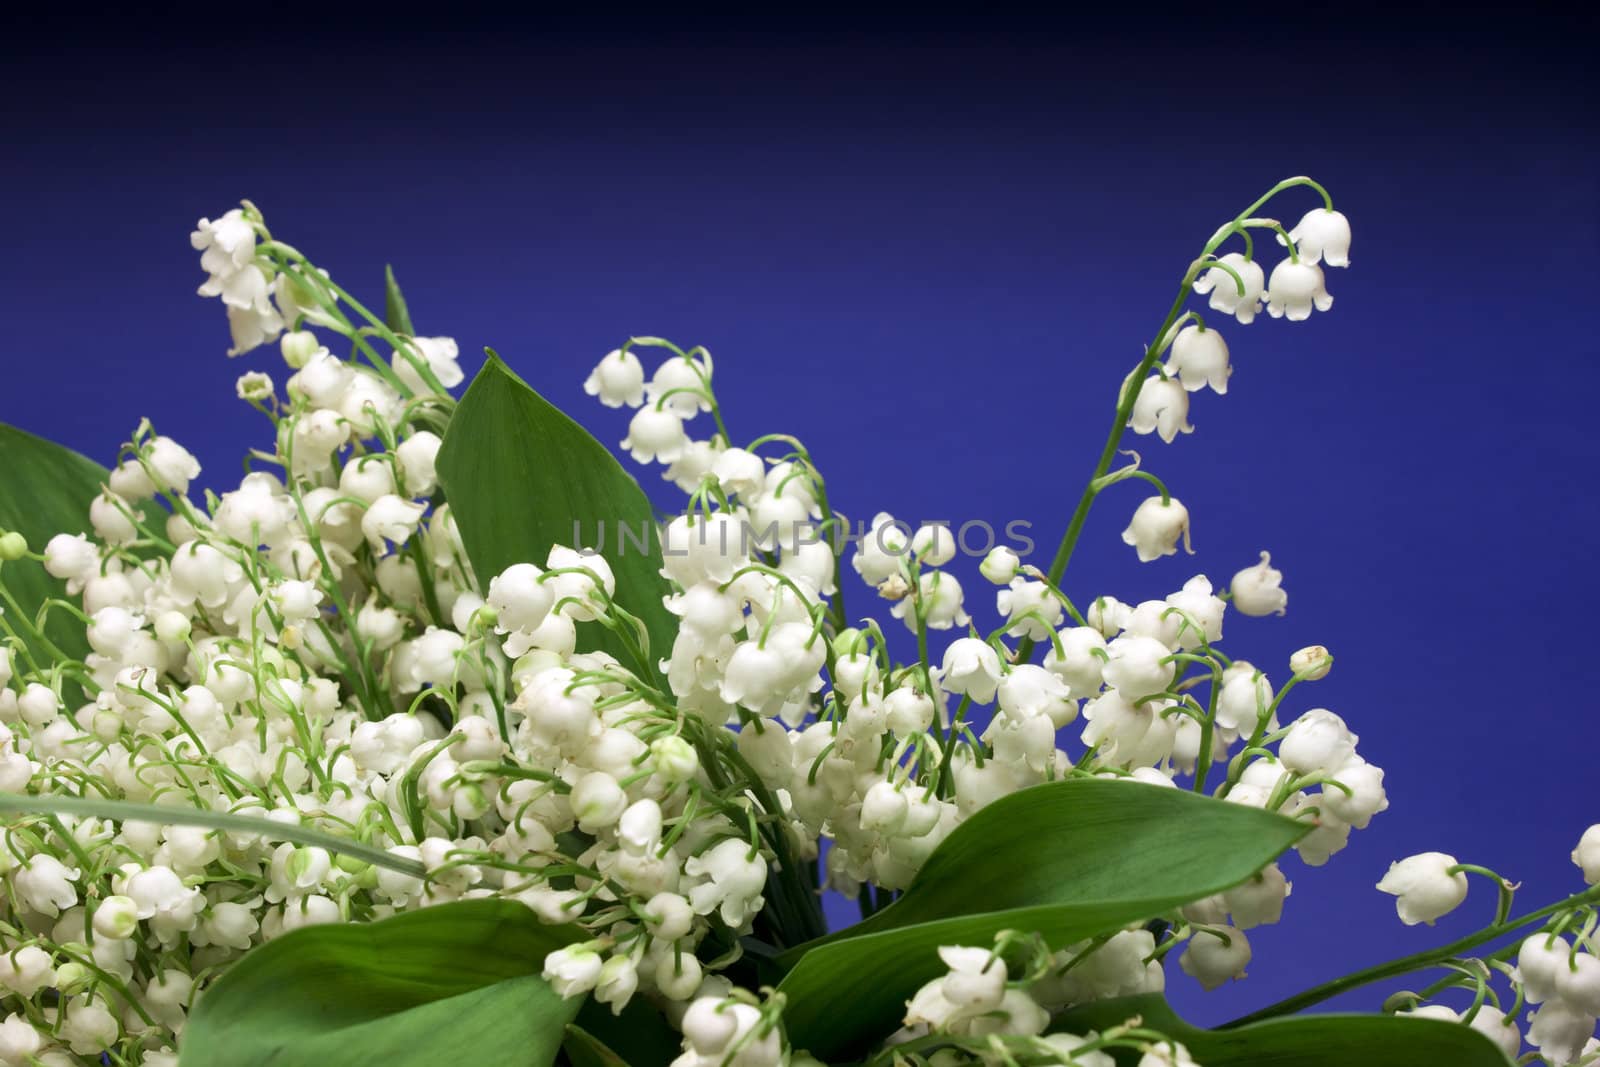 Beautiful fresh Lily-of-the-valey flowers over dark blue background